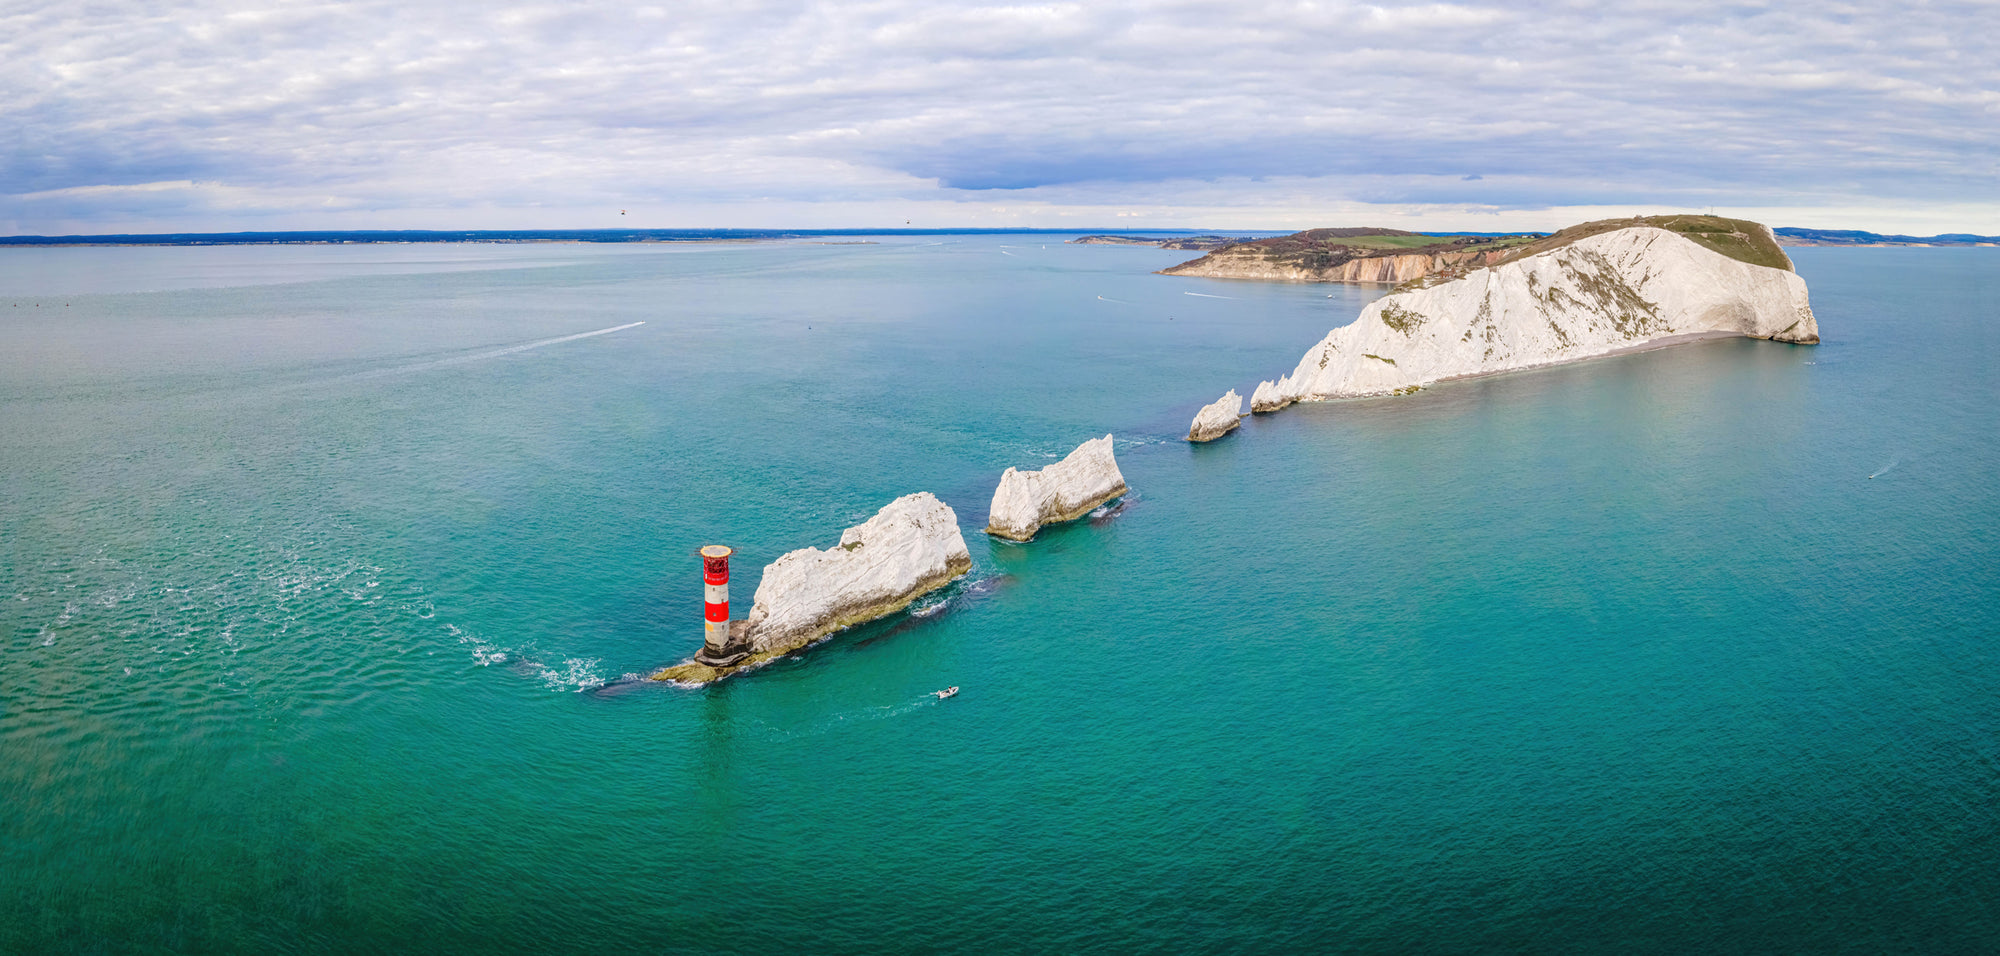 Places to visit: Isle of Wight